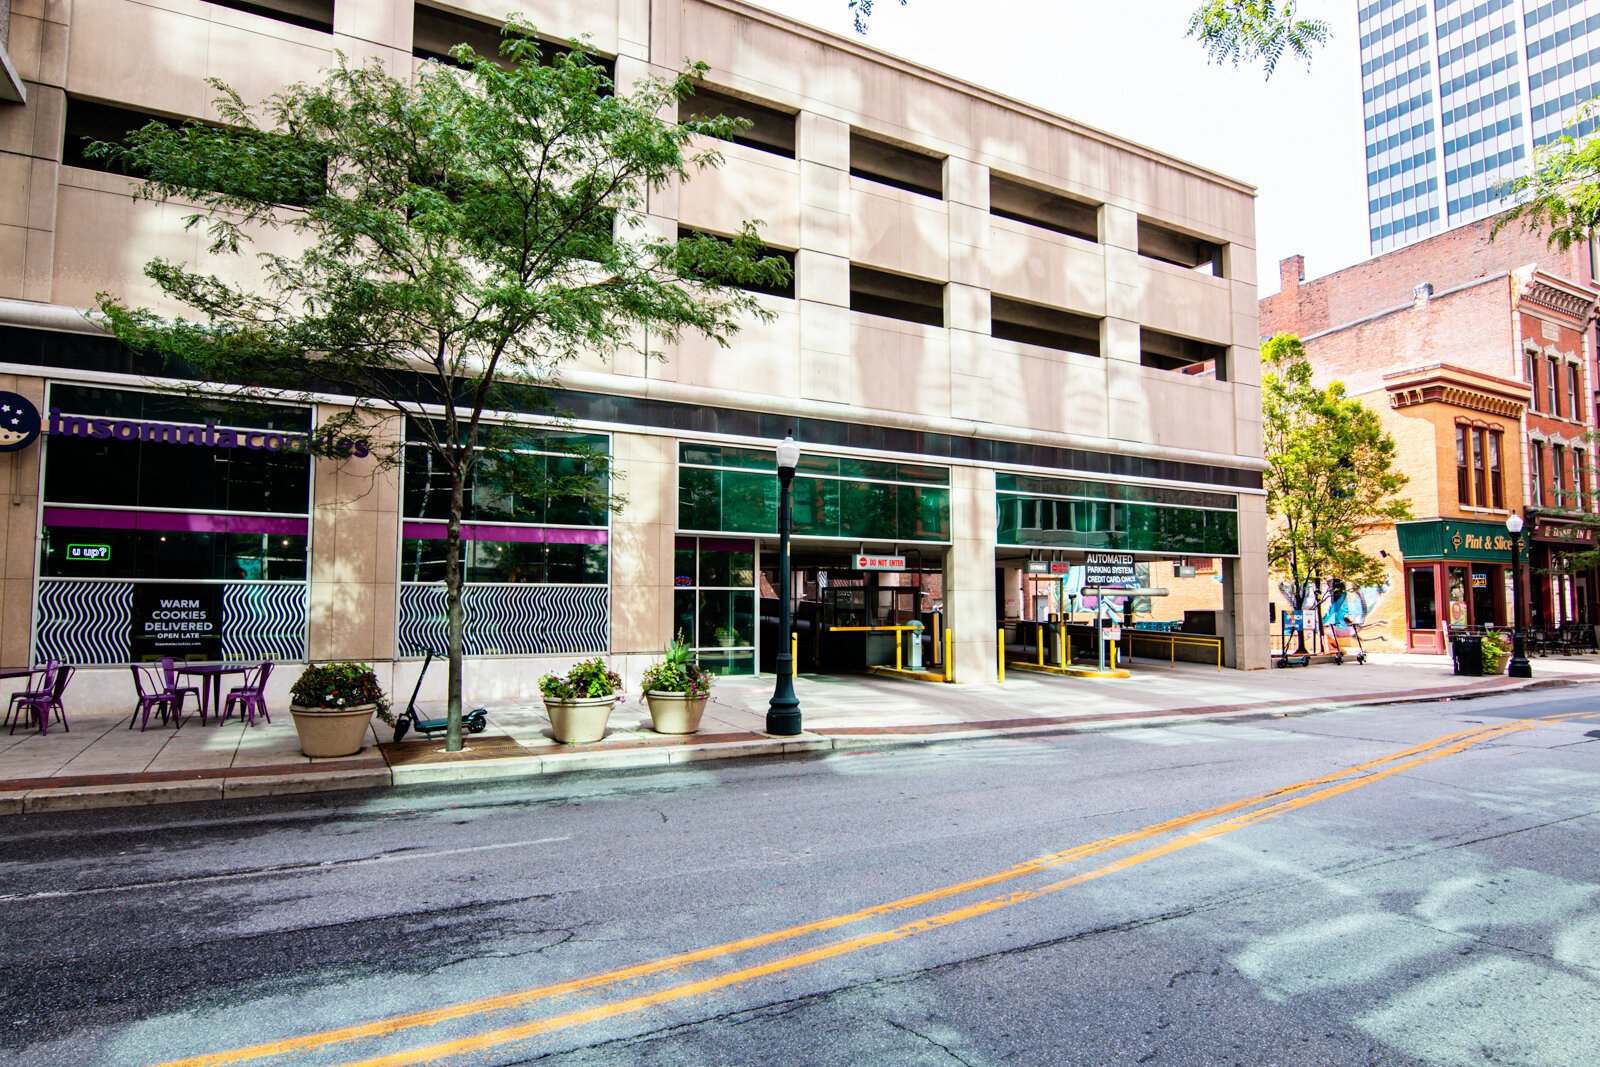 The City Center garage at 814 S. Calhoun St. is ideal for skyline views of Downtown.